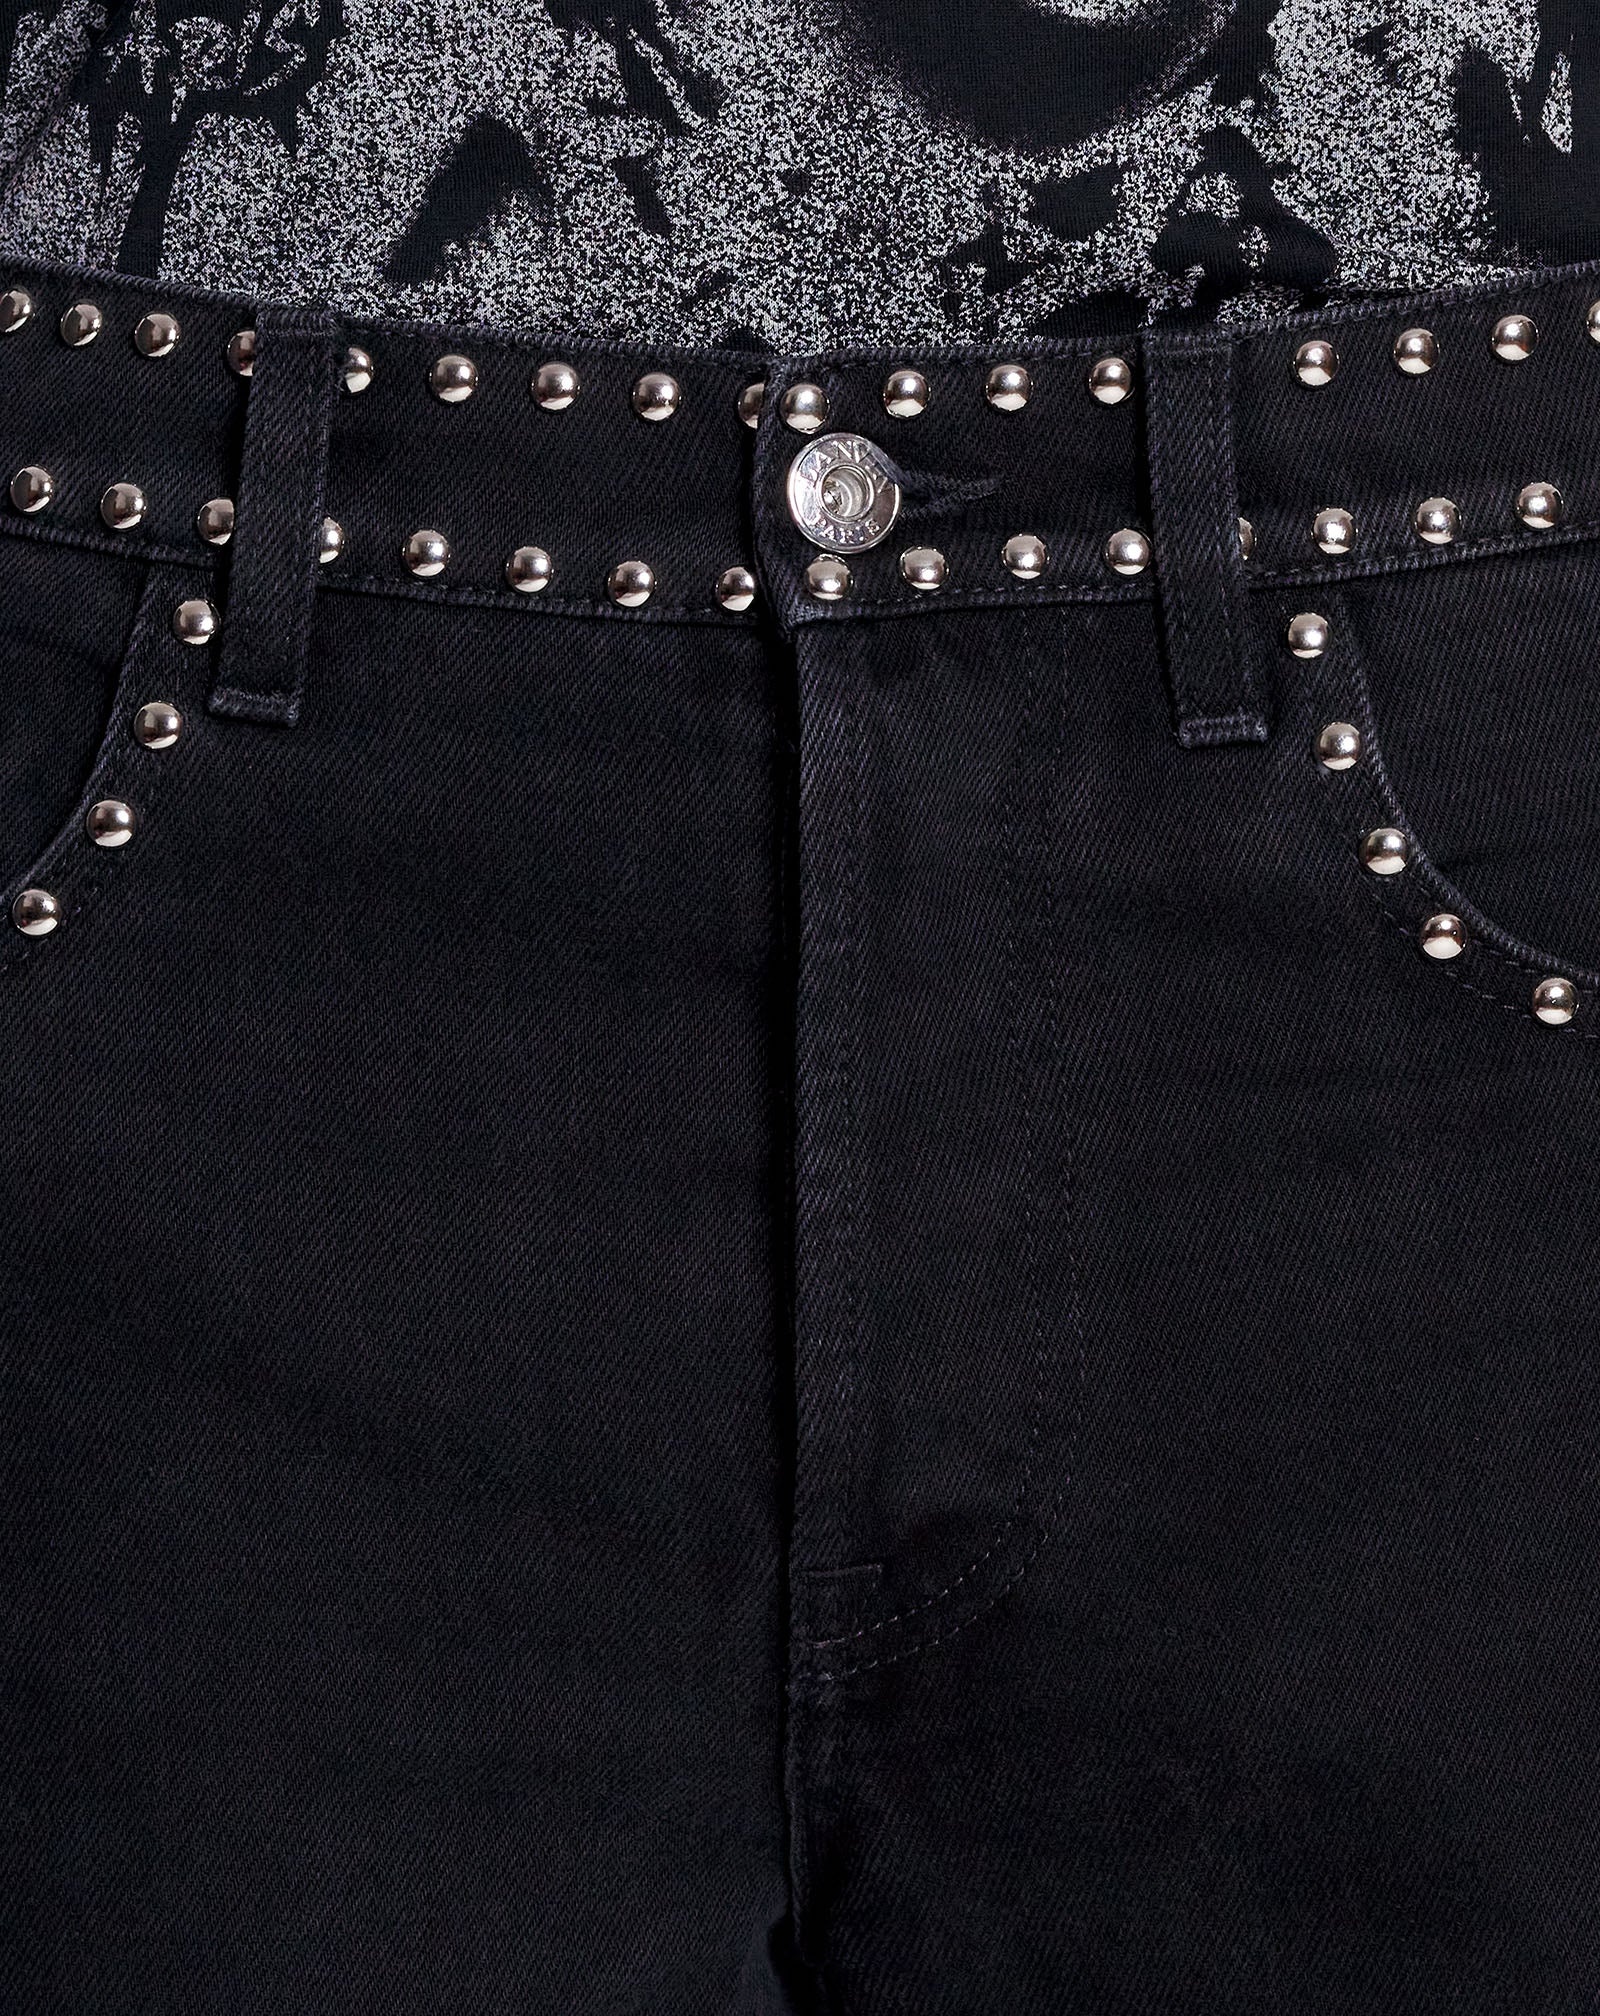 LANVIN X FUTURE STUDDED FLARED PANTS FOR MEN - 5